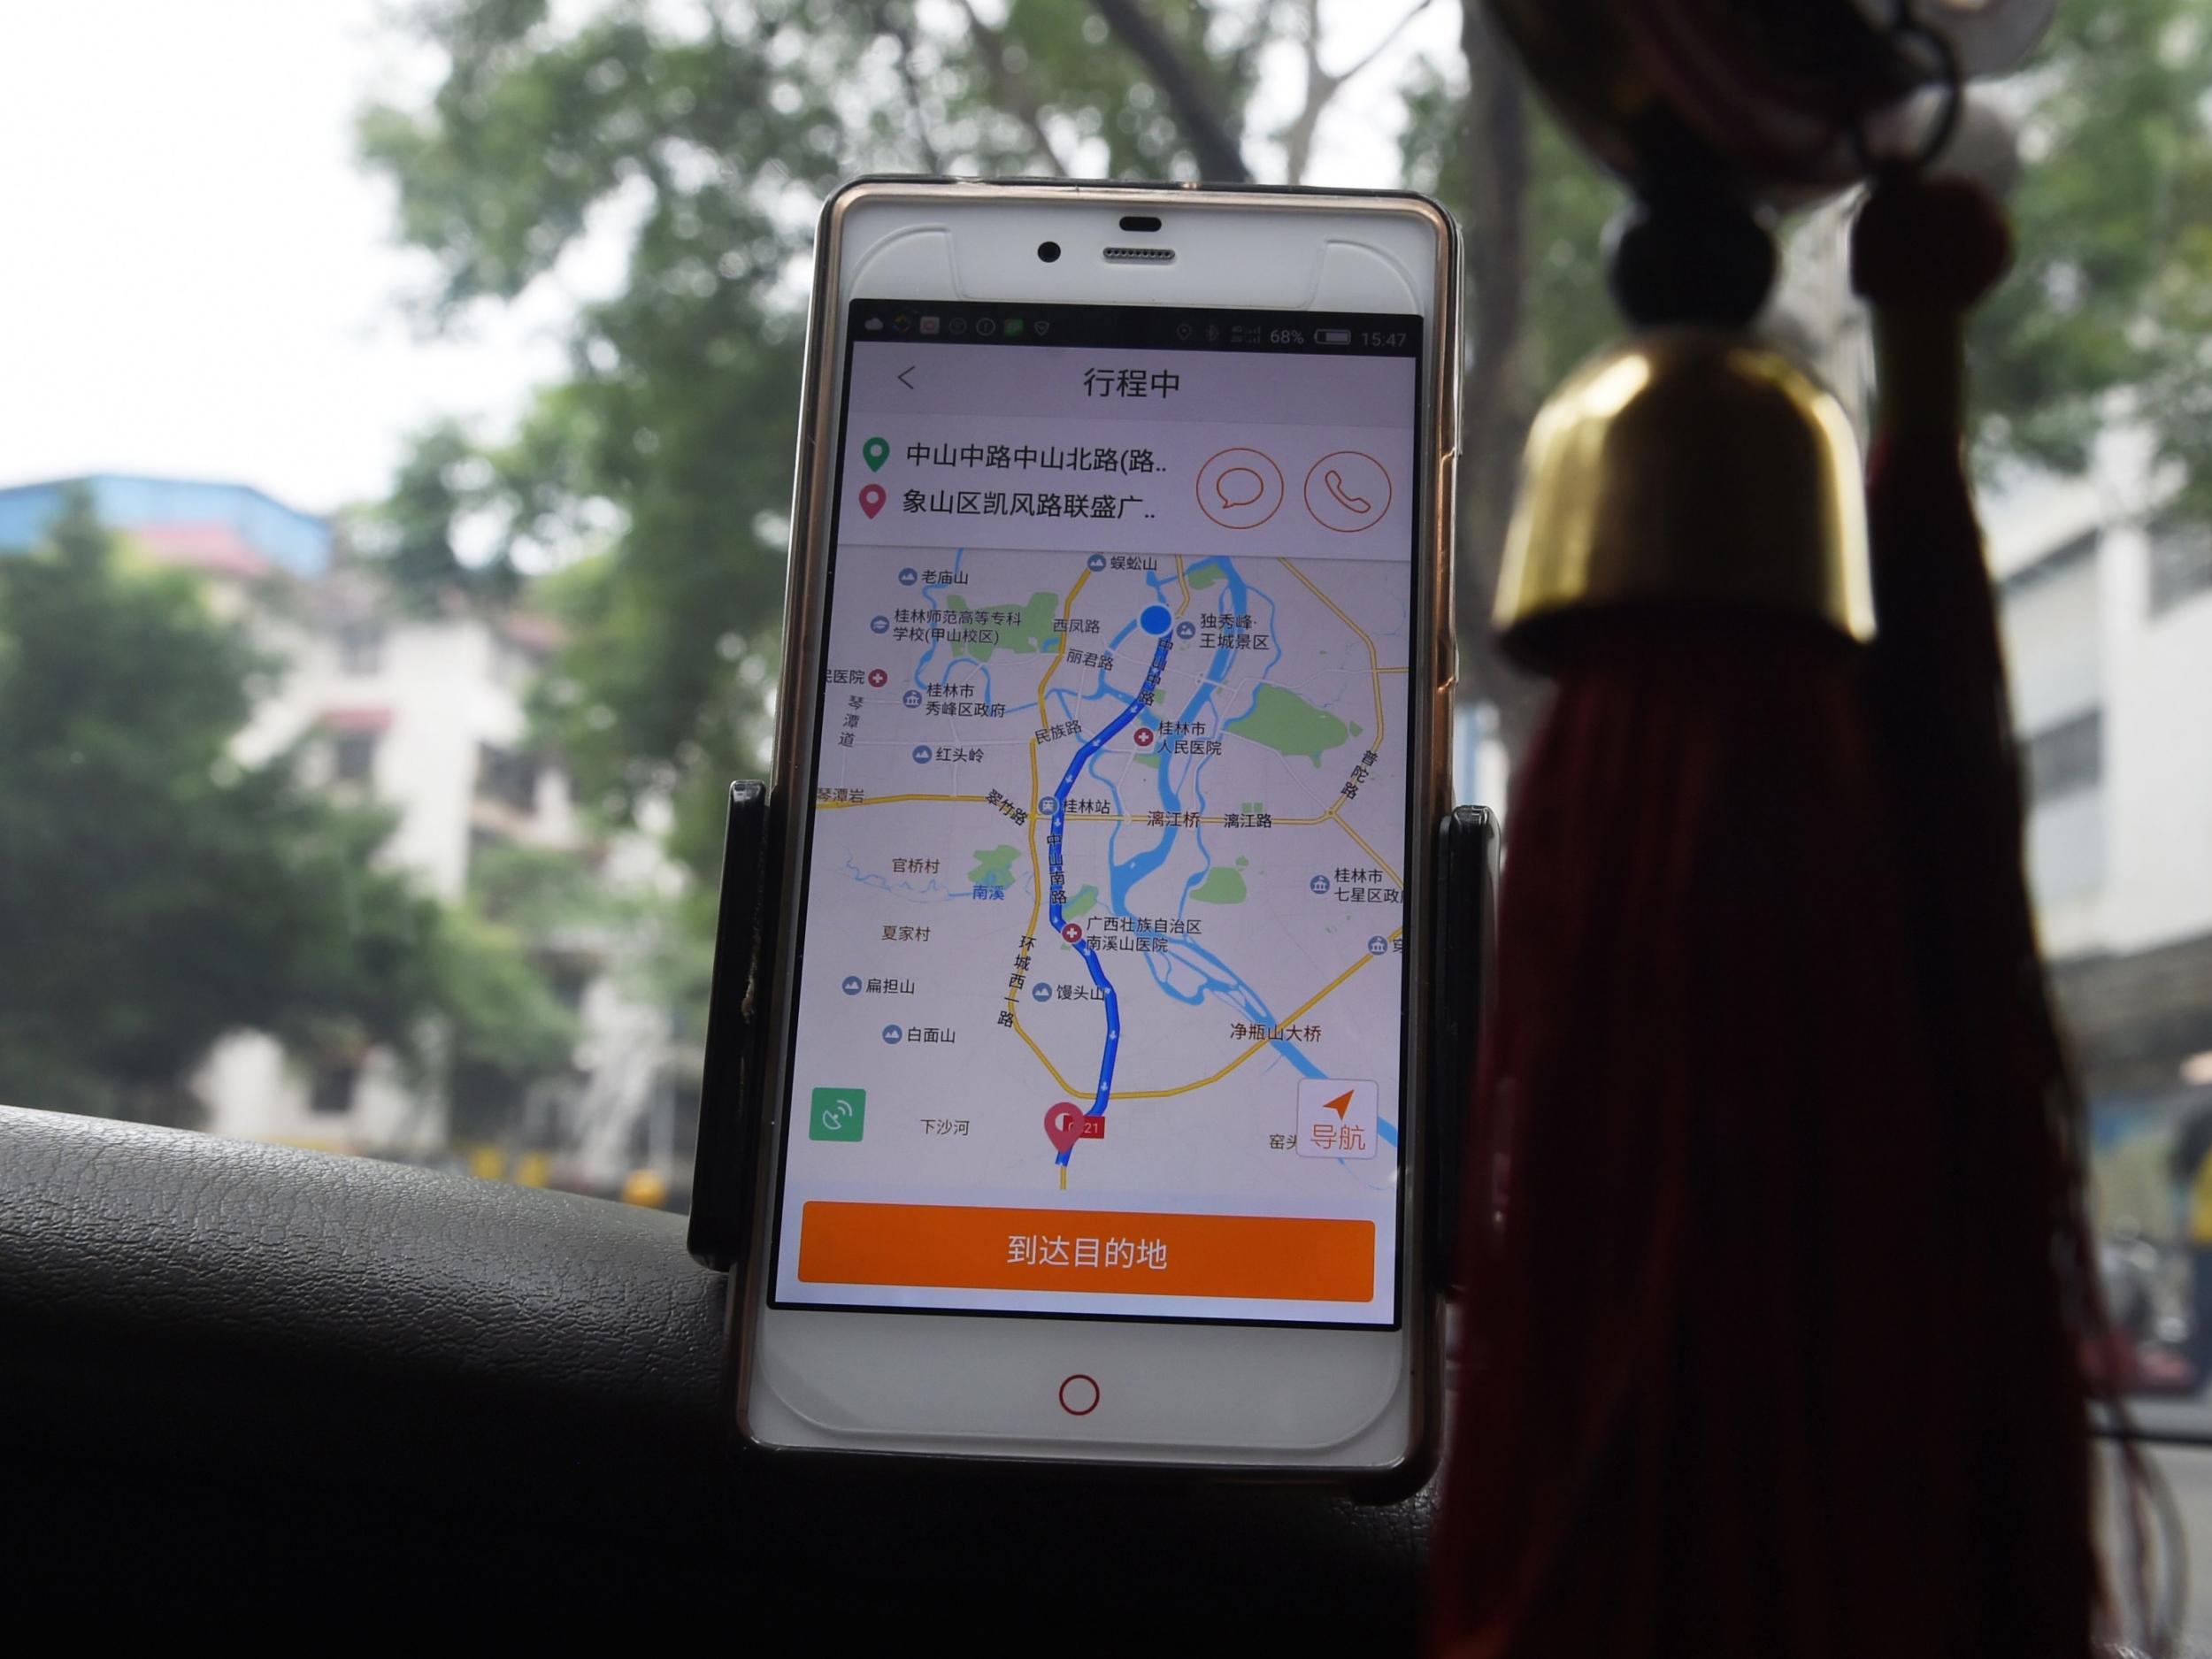 On Saturday, Didi Chuxing apologised, saying it has 'inescapable responsibility' for the incident